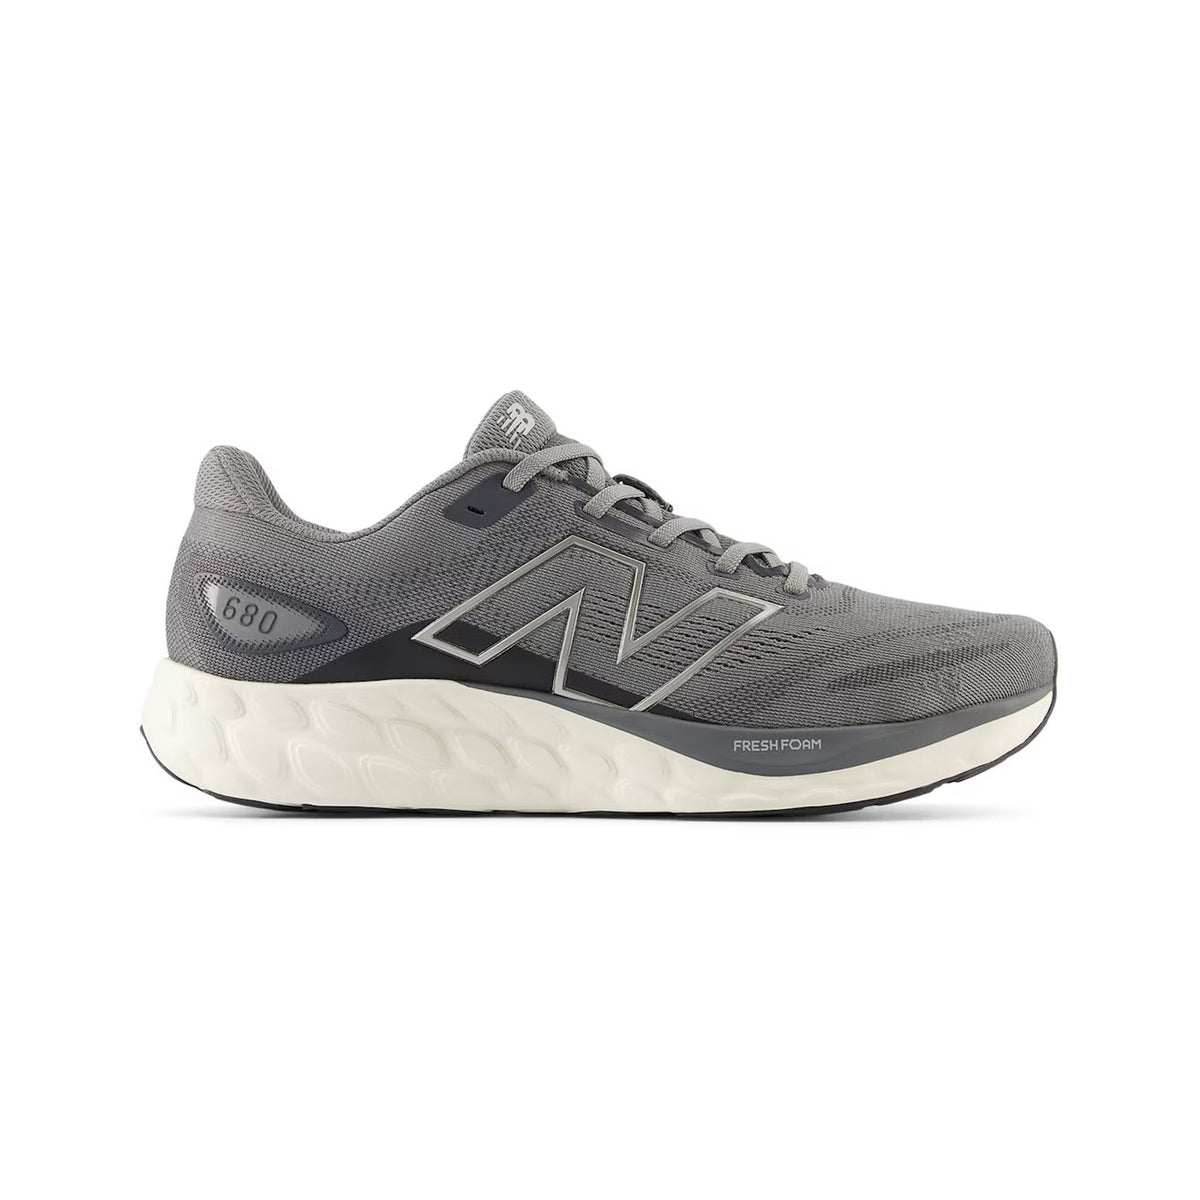 A New Balance 680v8 Blue Harbor Grey/Magnet/Dark Silver running shoe with a white sole, featuring the logo on the side and &quot;fresh foam&quot; text on the cushioned midsole.